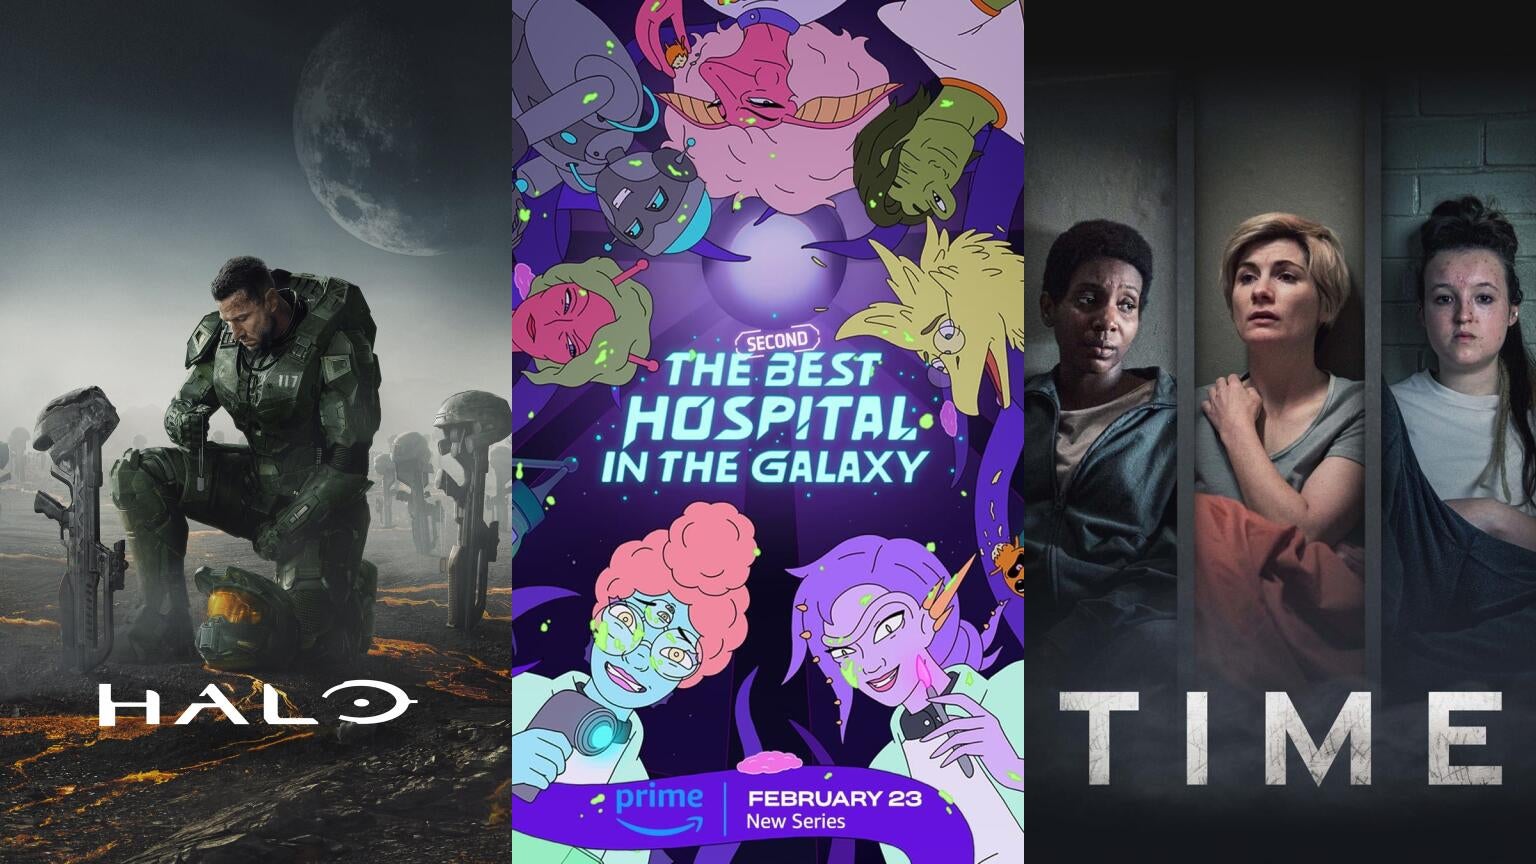 Posters for Paramount+'s "Halo," Prime Video's "The Second Best Hospital in the Galaxy," and BBC One/BritBox's "Time"